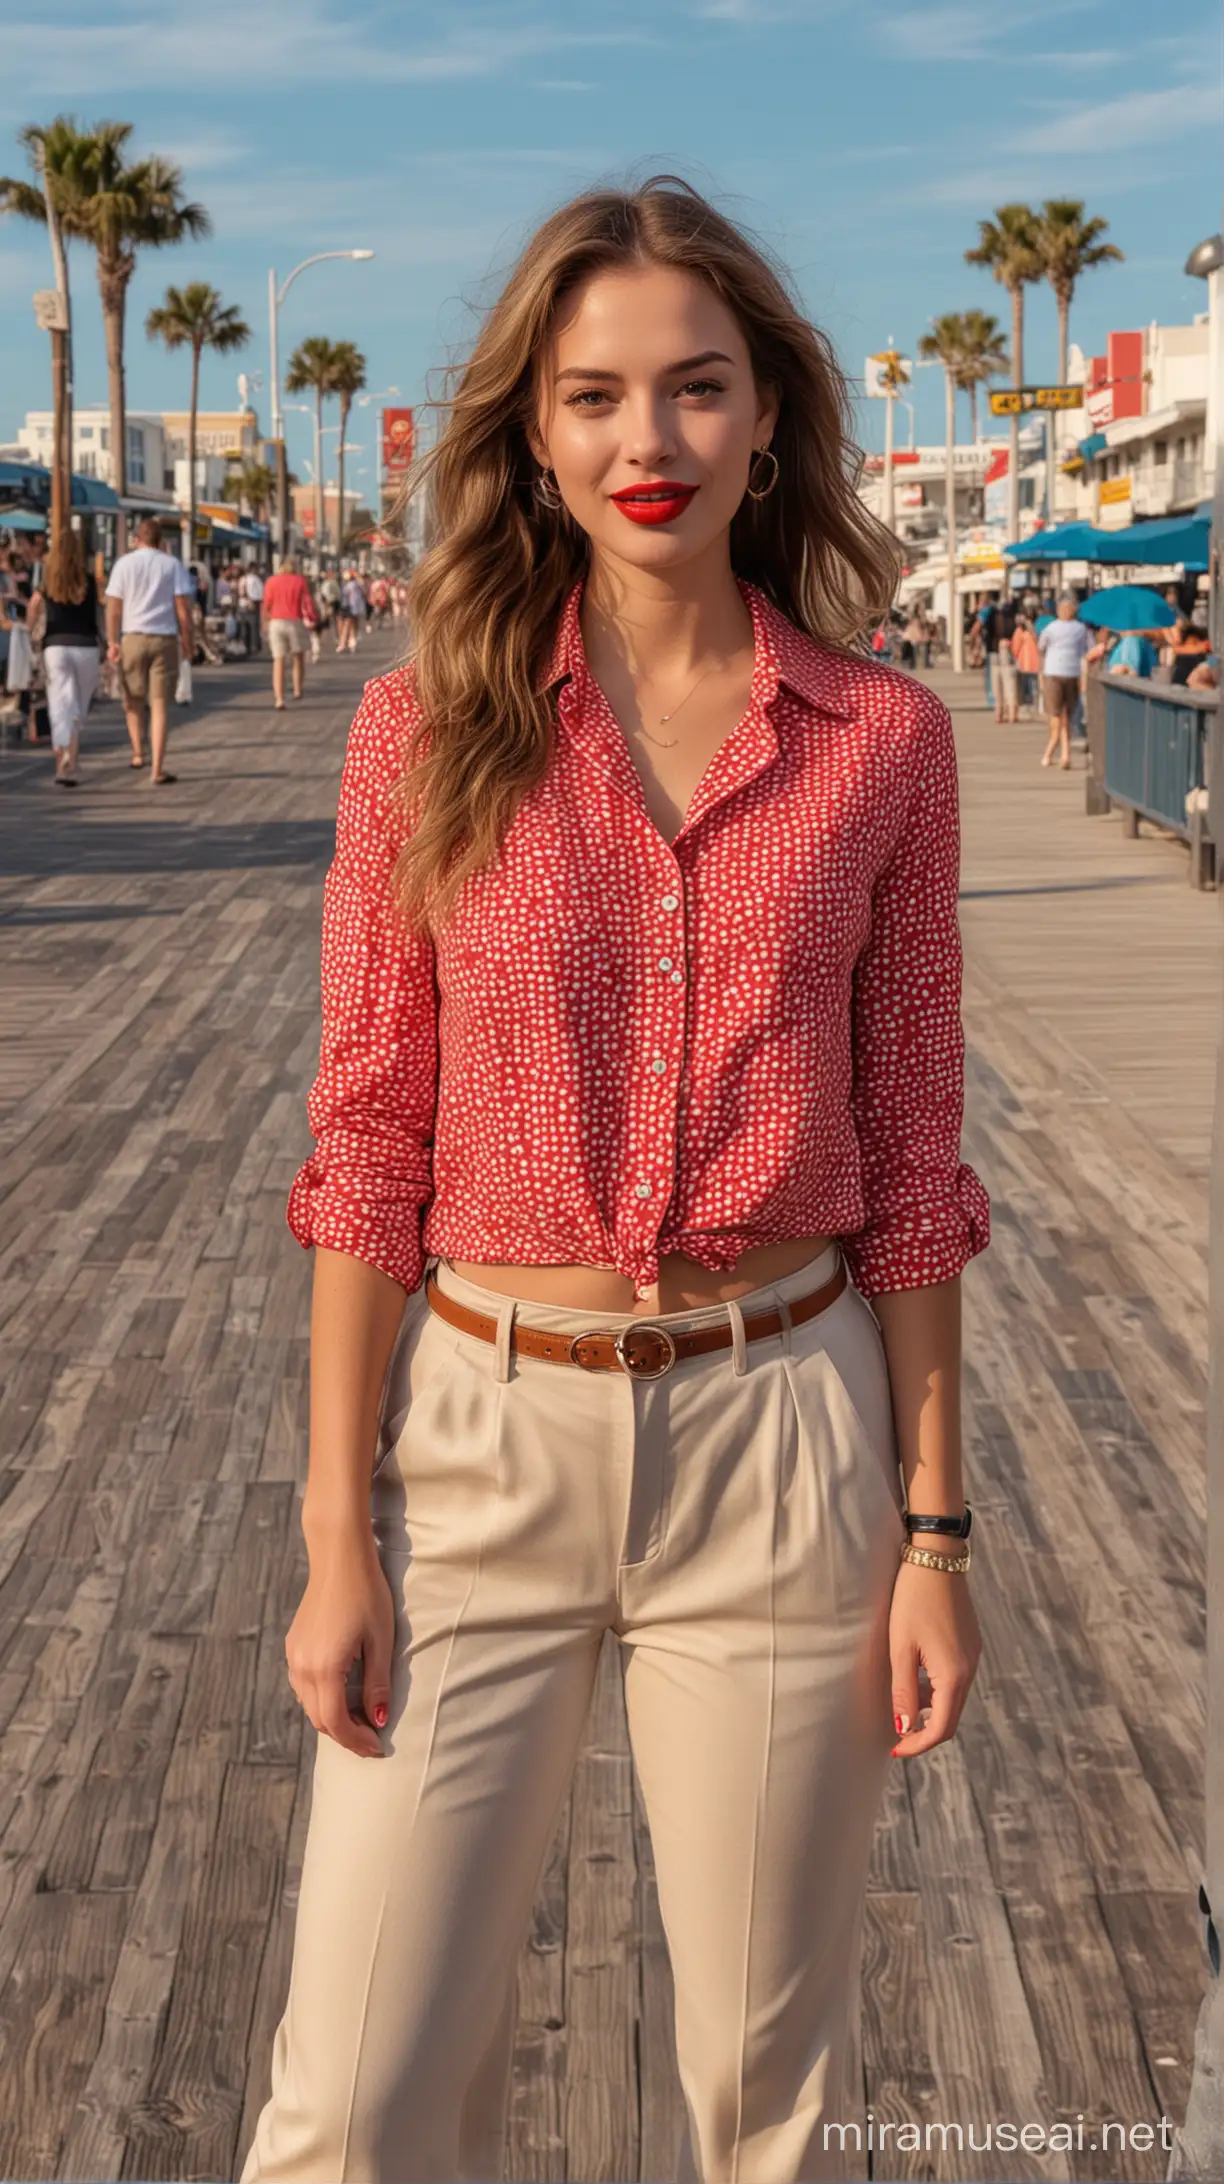 4k Ai art best view beautiful USA girl brown open hair red lipstick ear tops six pokit trousers and coral button shirt in usa Ocean City boardwalk